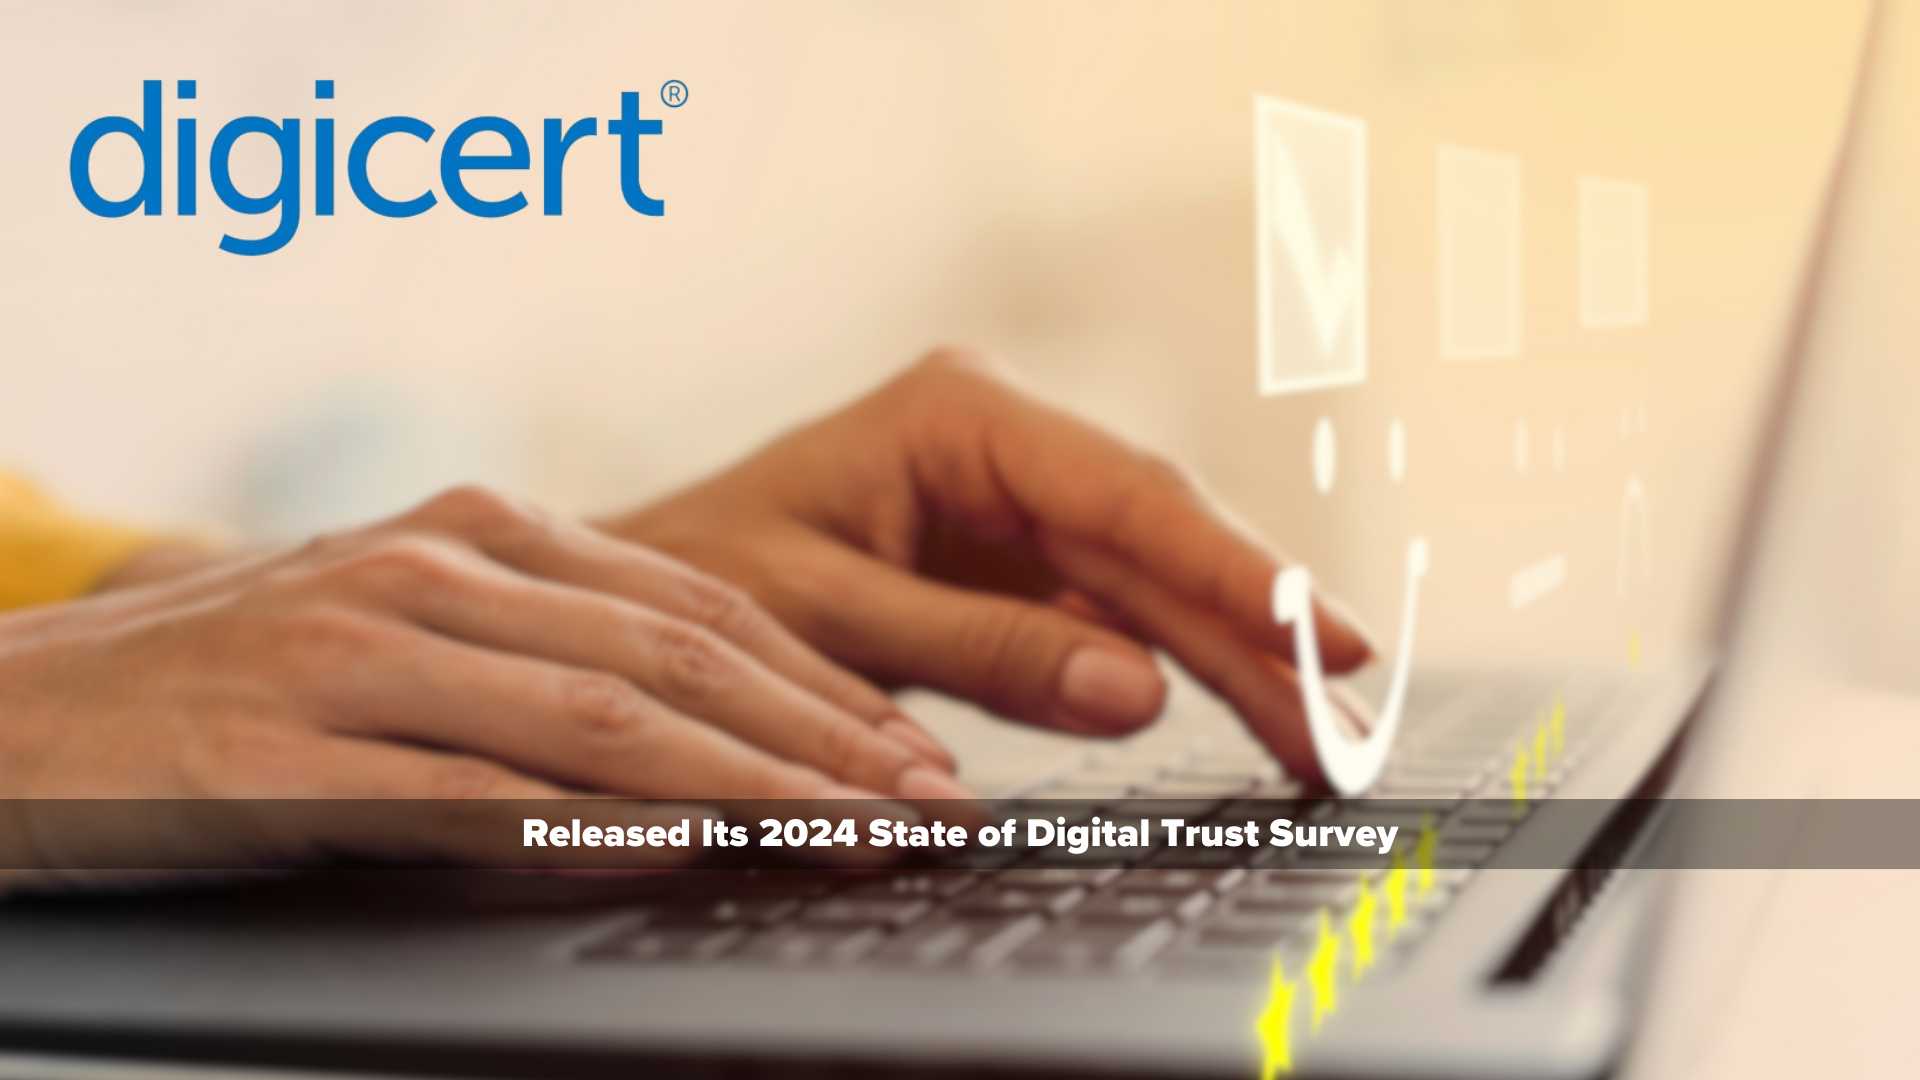 Latest DigiCert Study Reveals Widening Gap Between Organizations Benefiting from Digital Trust and Those Losing Out